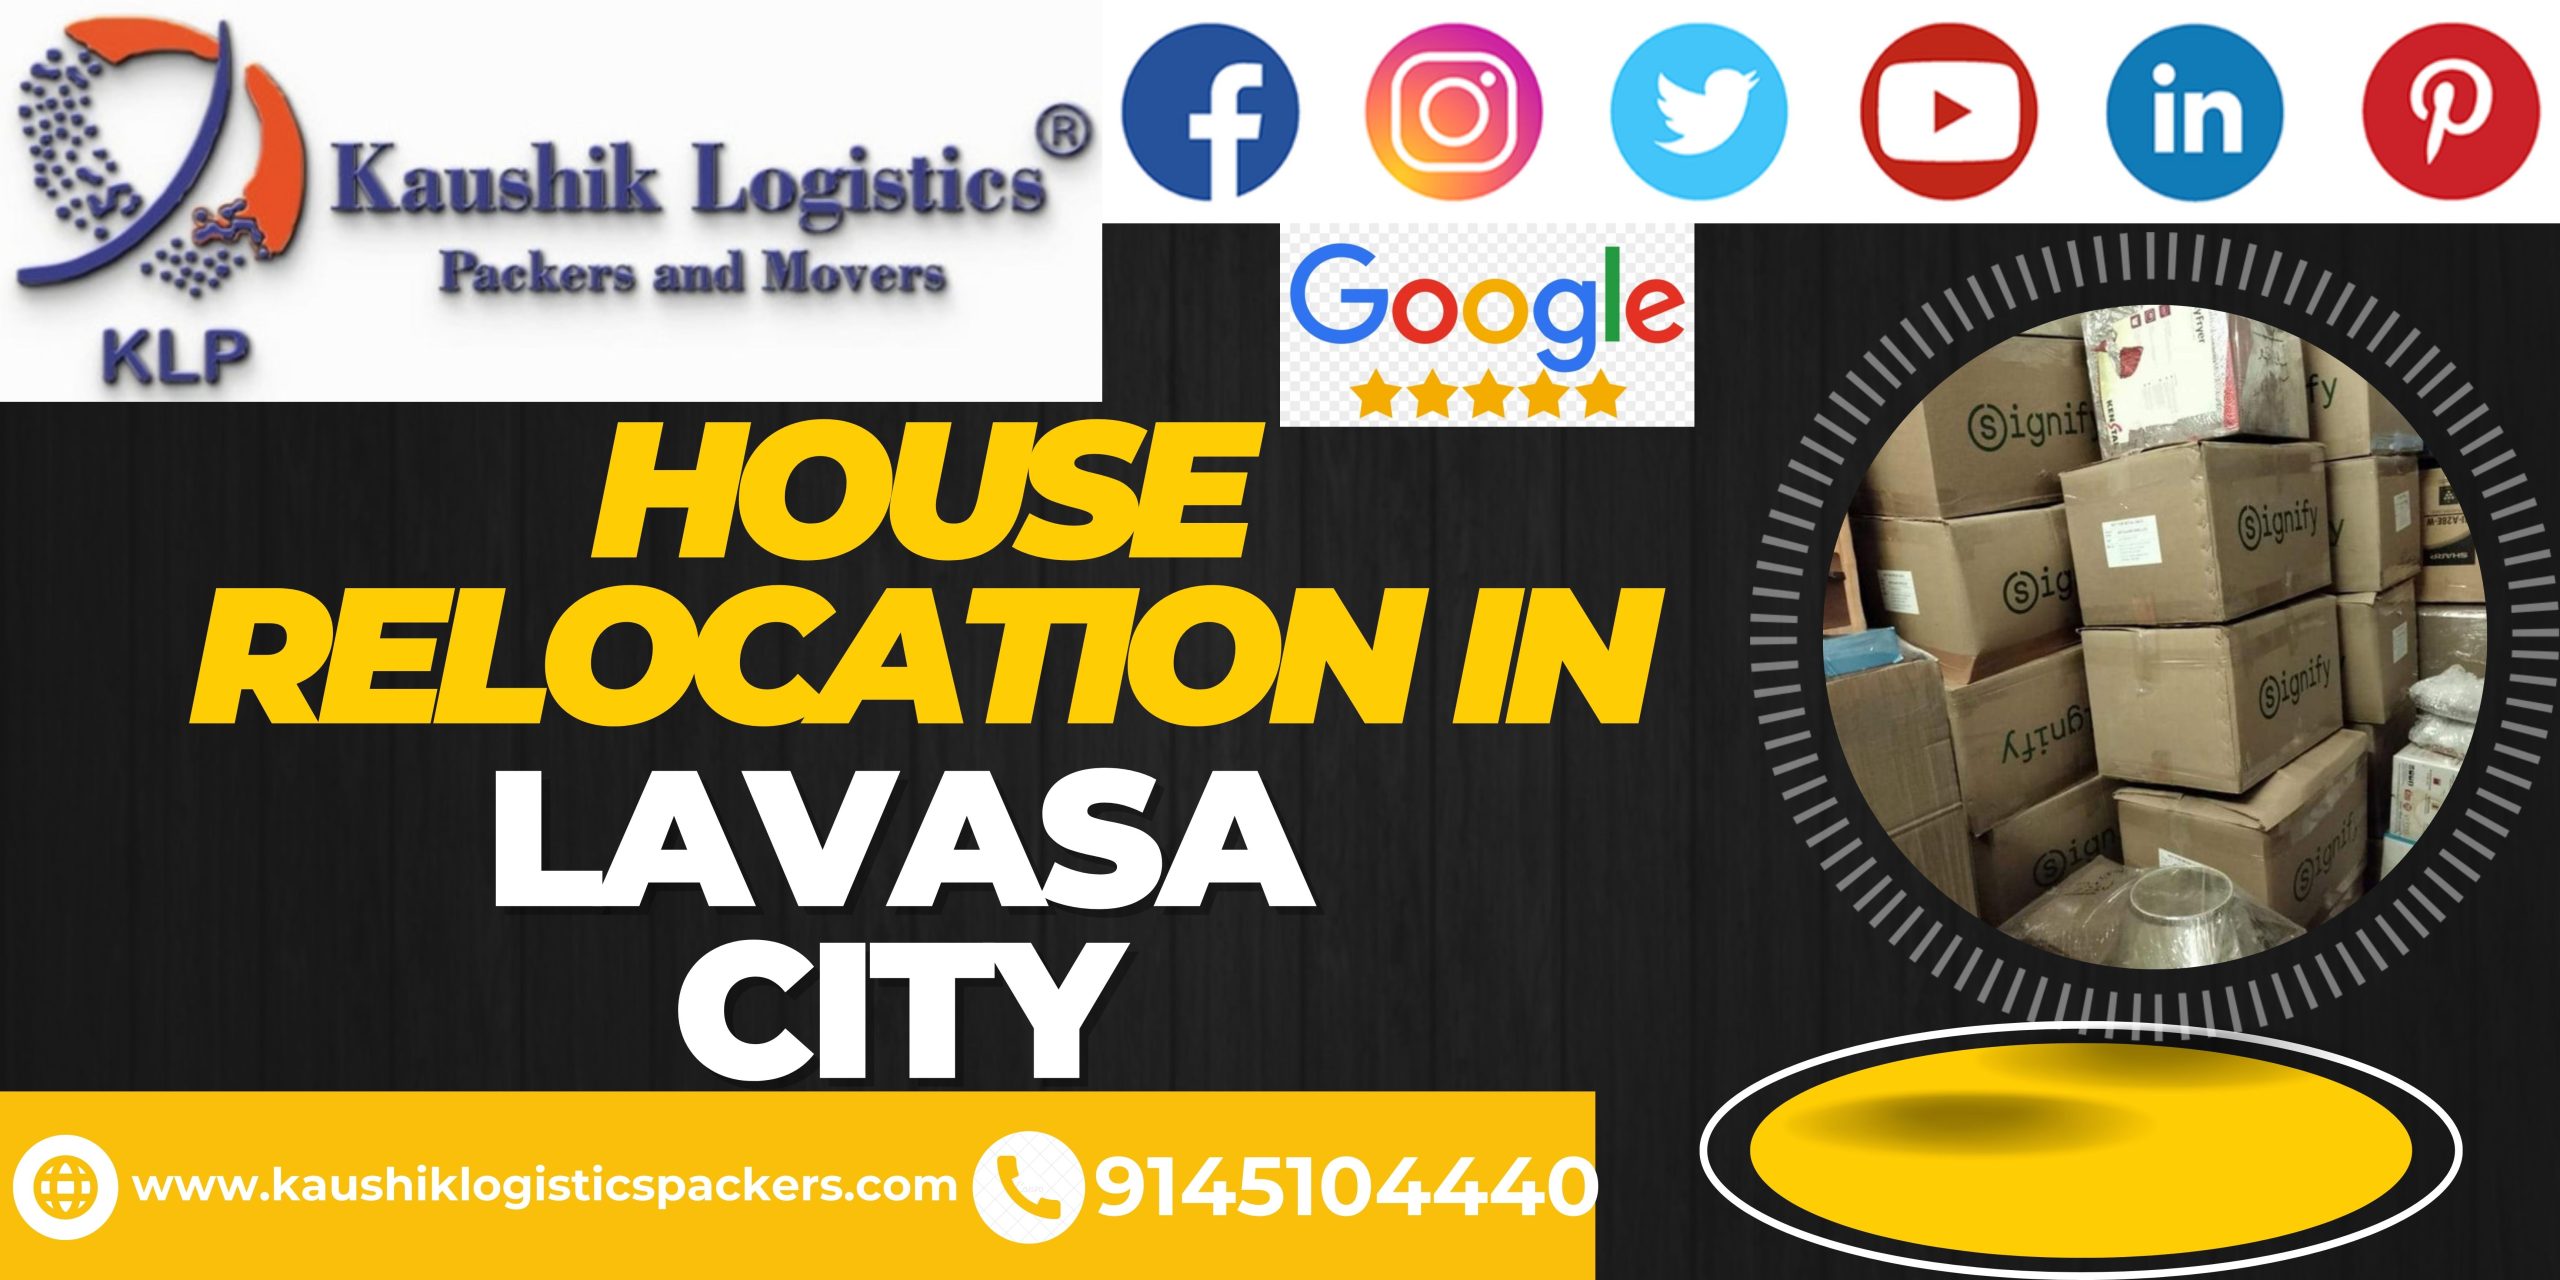 Packers and Movers In Lavasa City